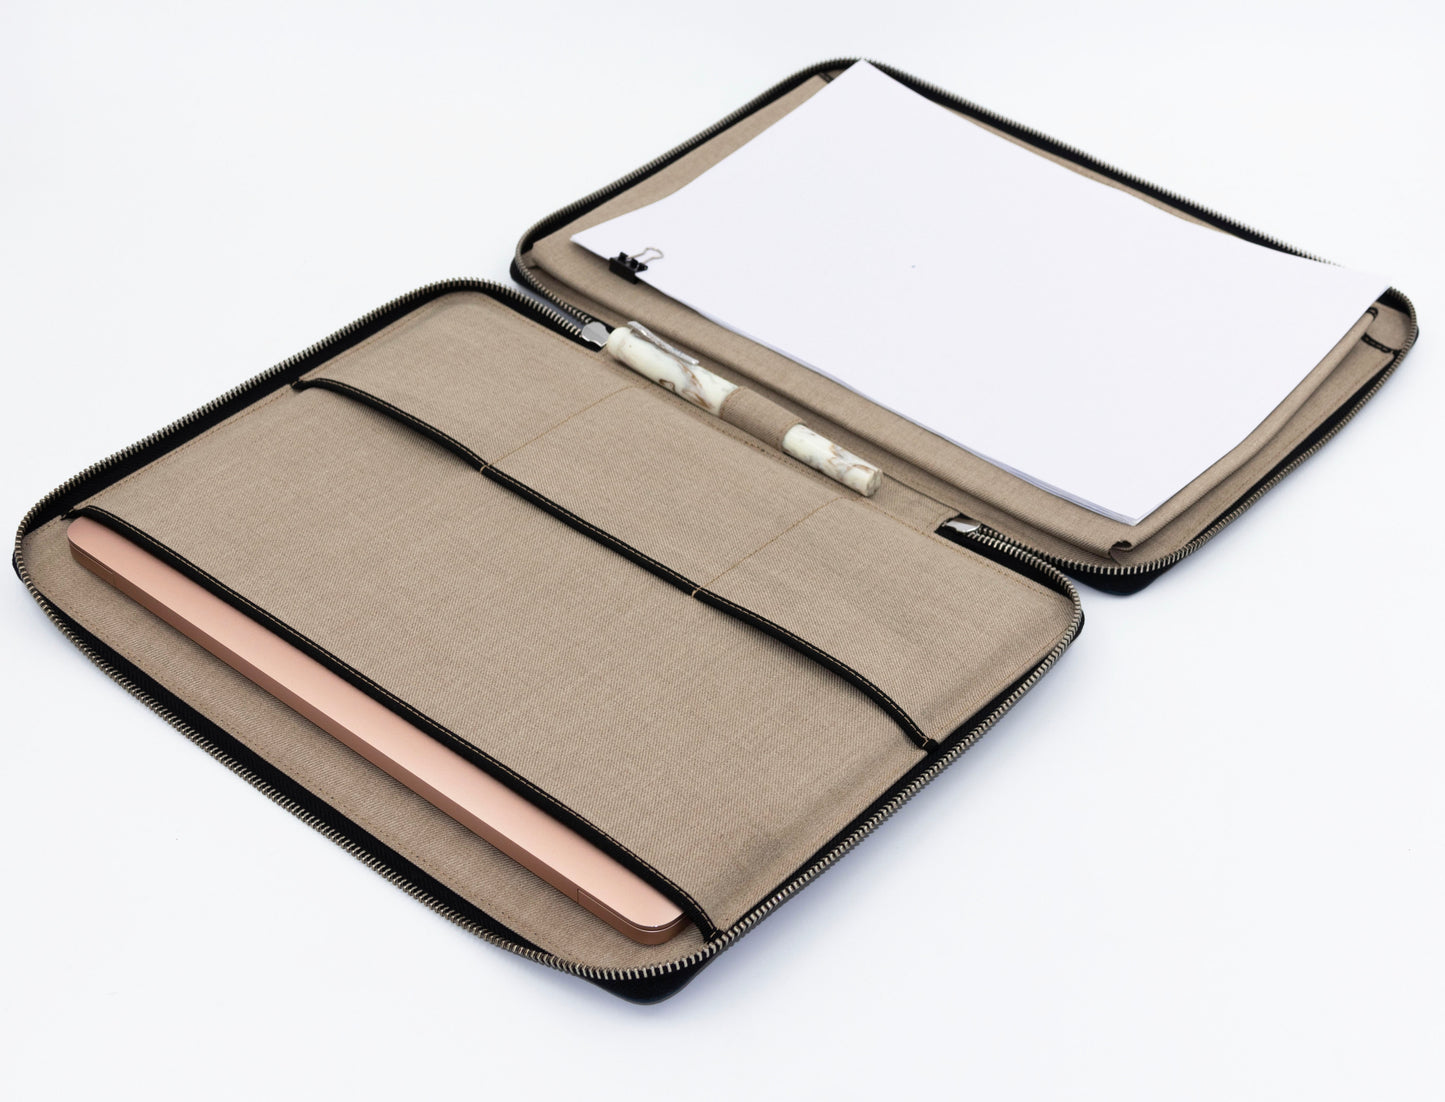 The interior of the case unzips to lay completely flat on a table. The left features a compartment to hold laptop, and the right side features a compartment to carry documents. Small flat pockets for carrying passport or pocket notebook